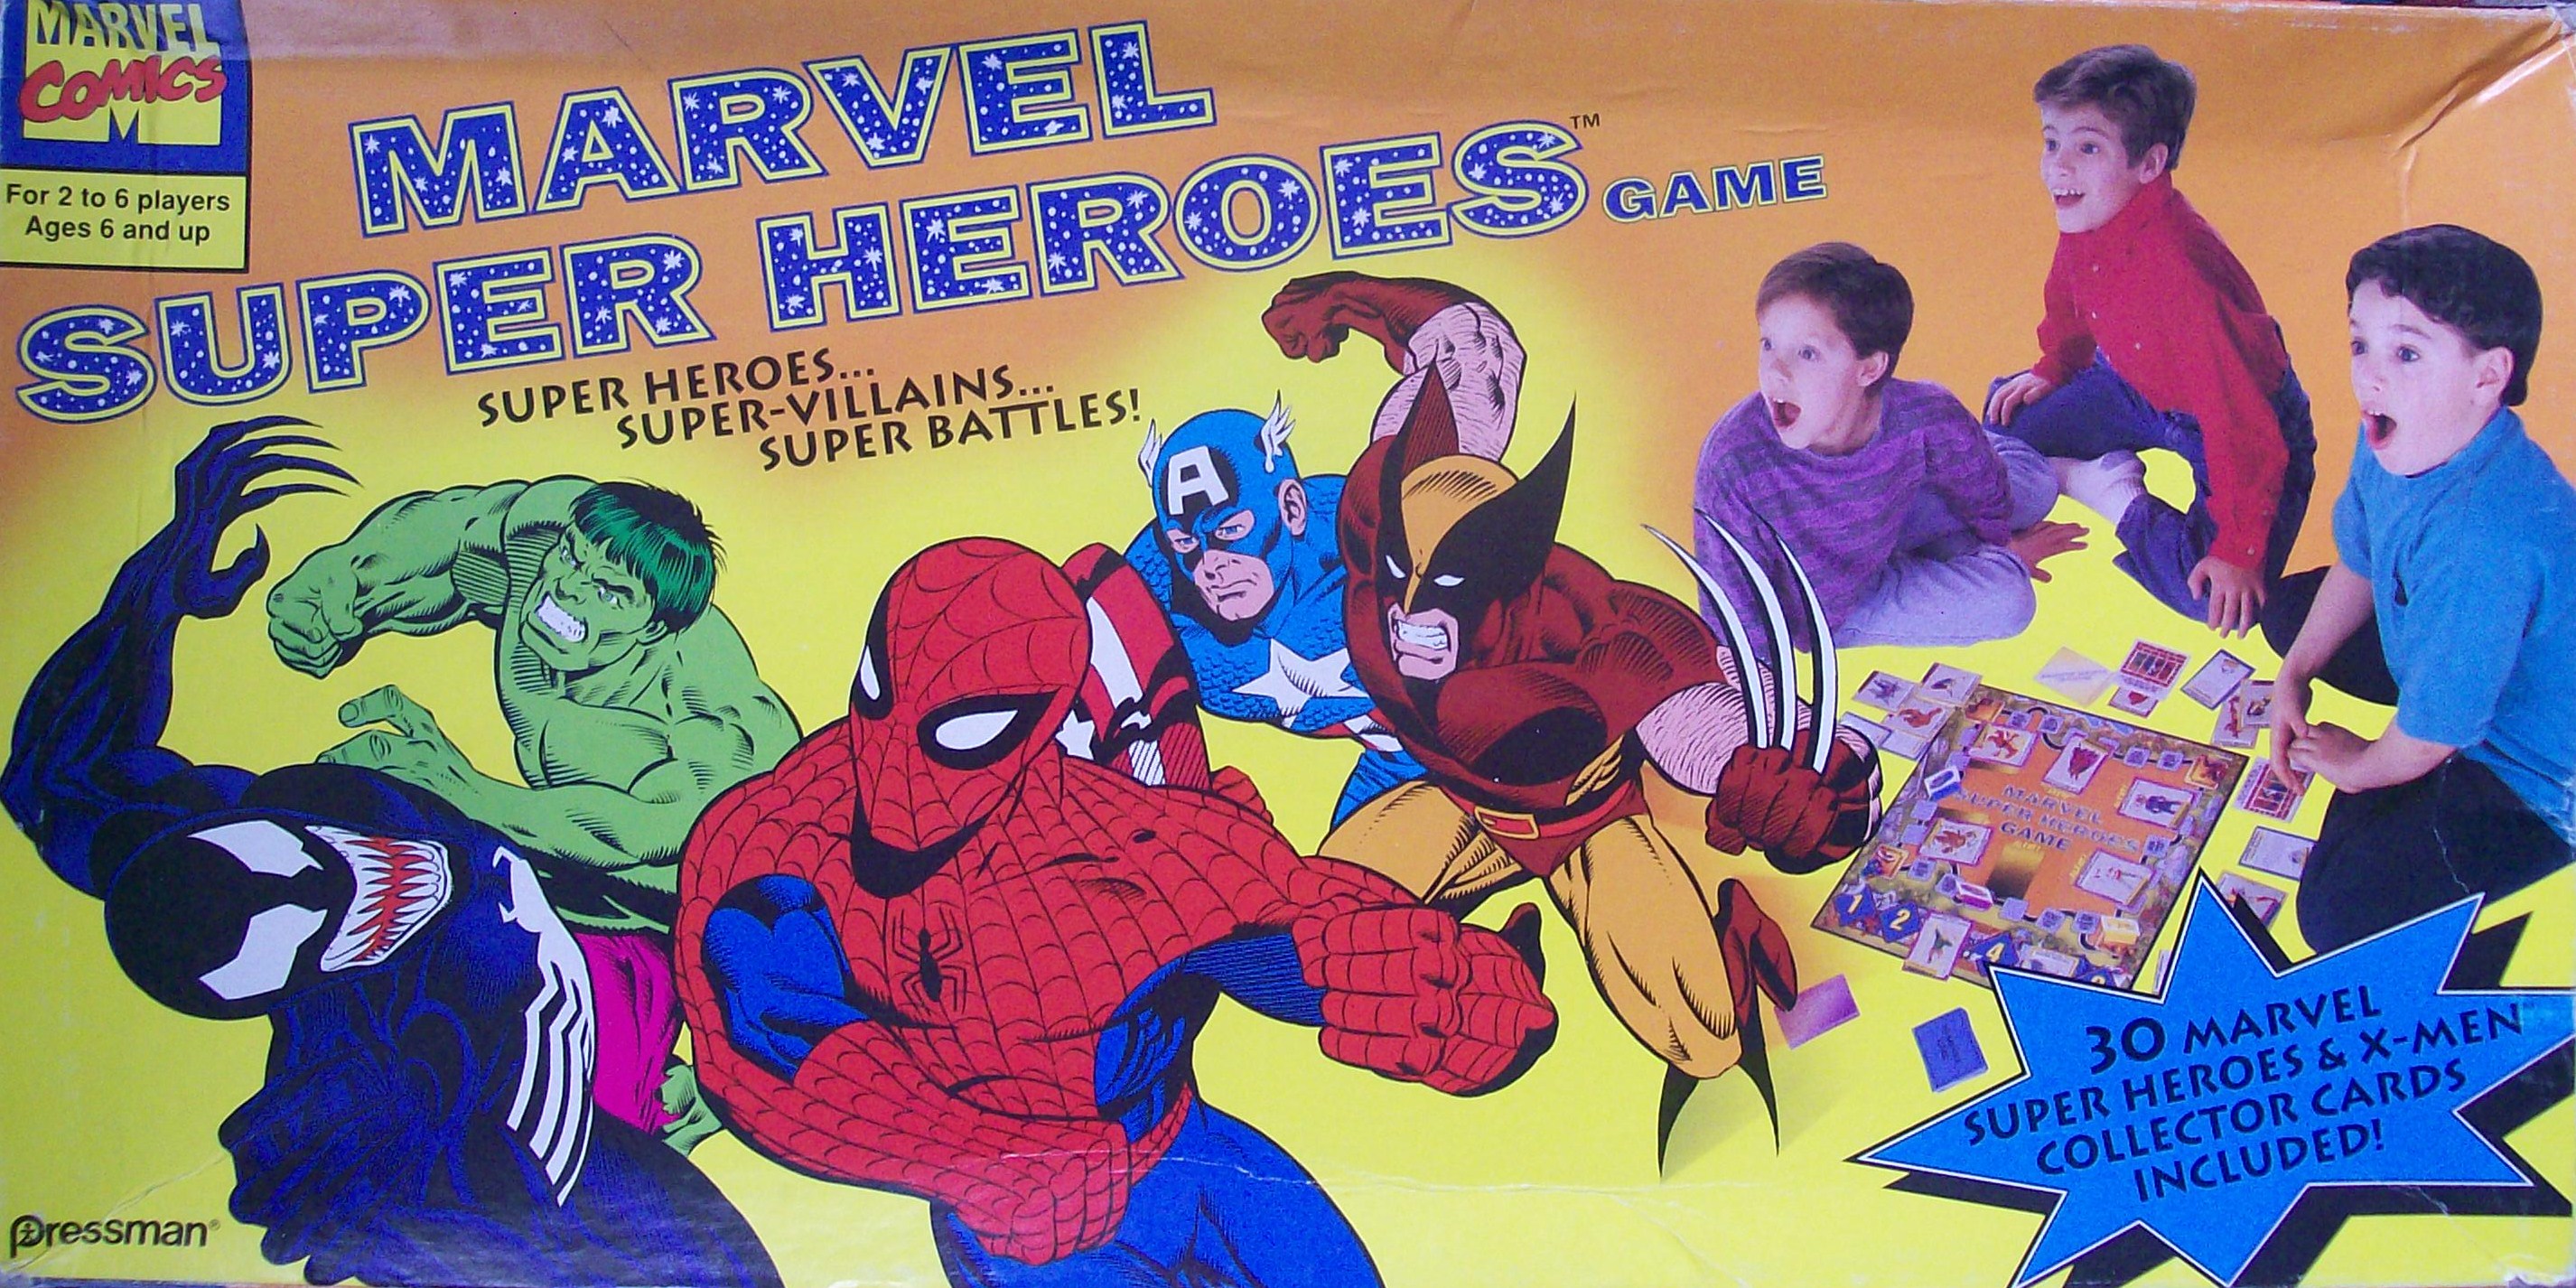 Pressman’s 1992 Marvel Super Heroes Collectible Game